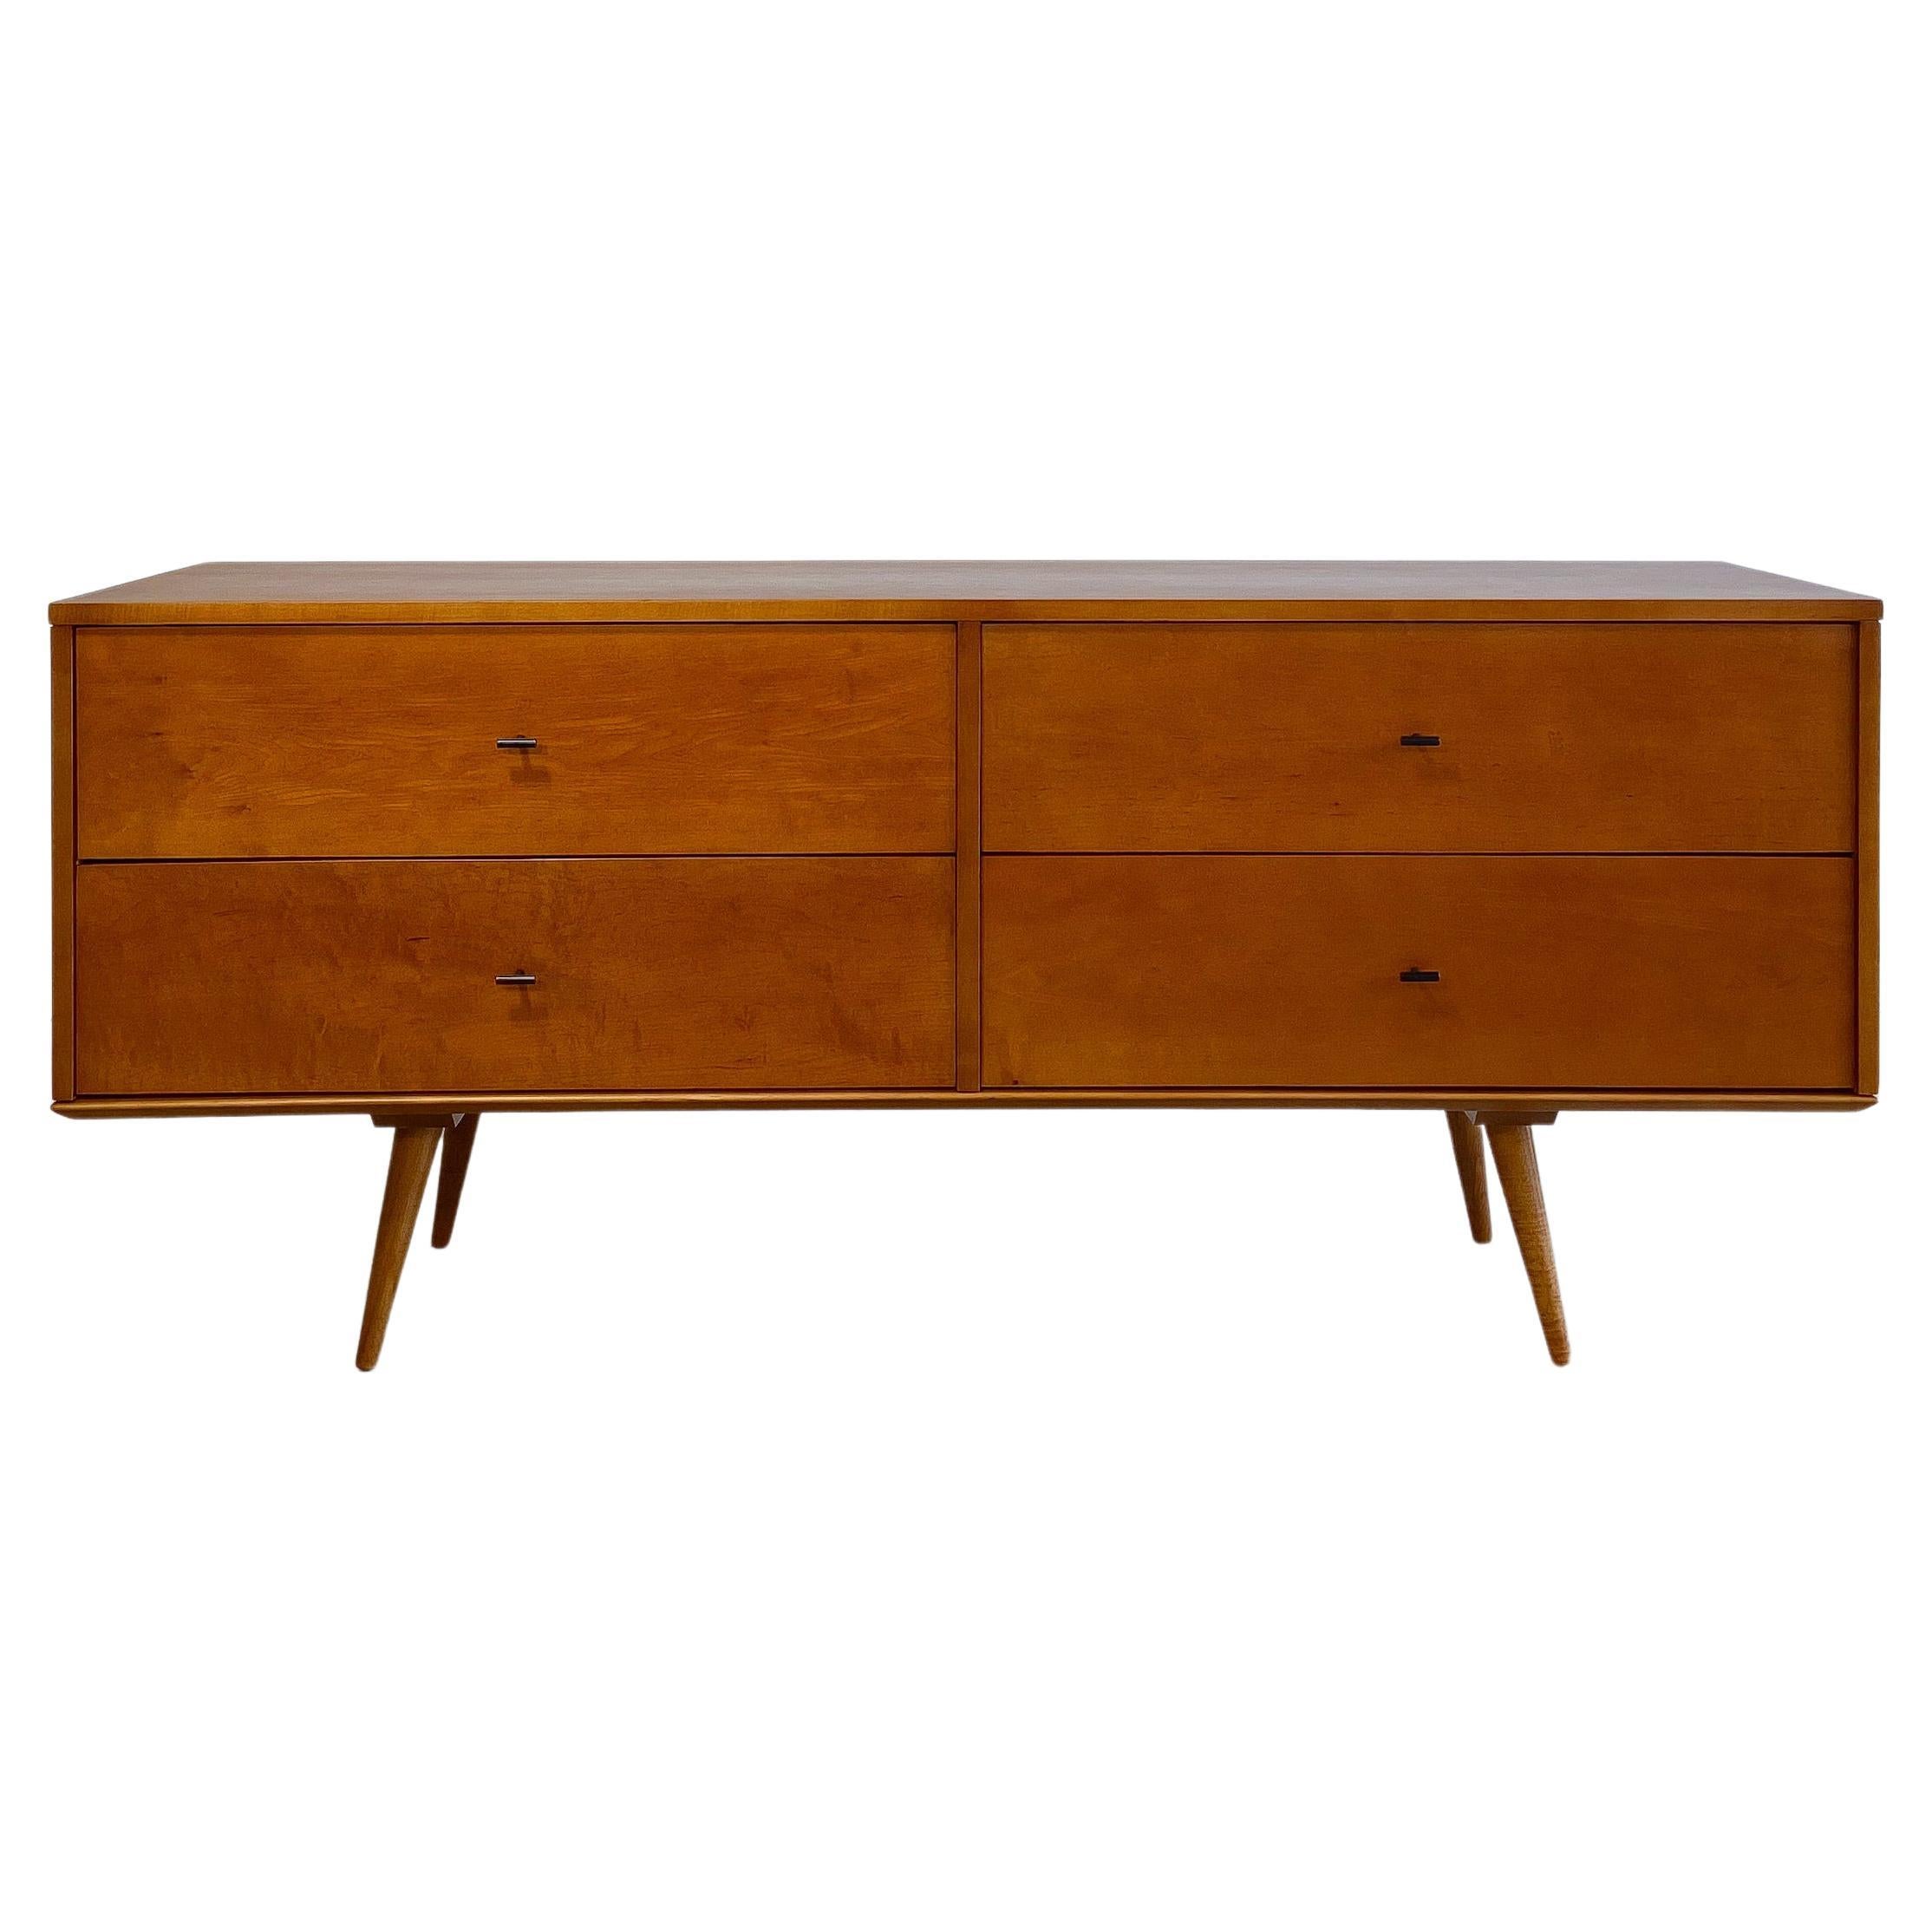 Paul McCobb Low Credenza or Dresser, Planner Group, 1950s